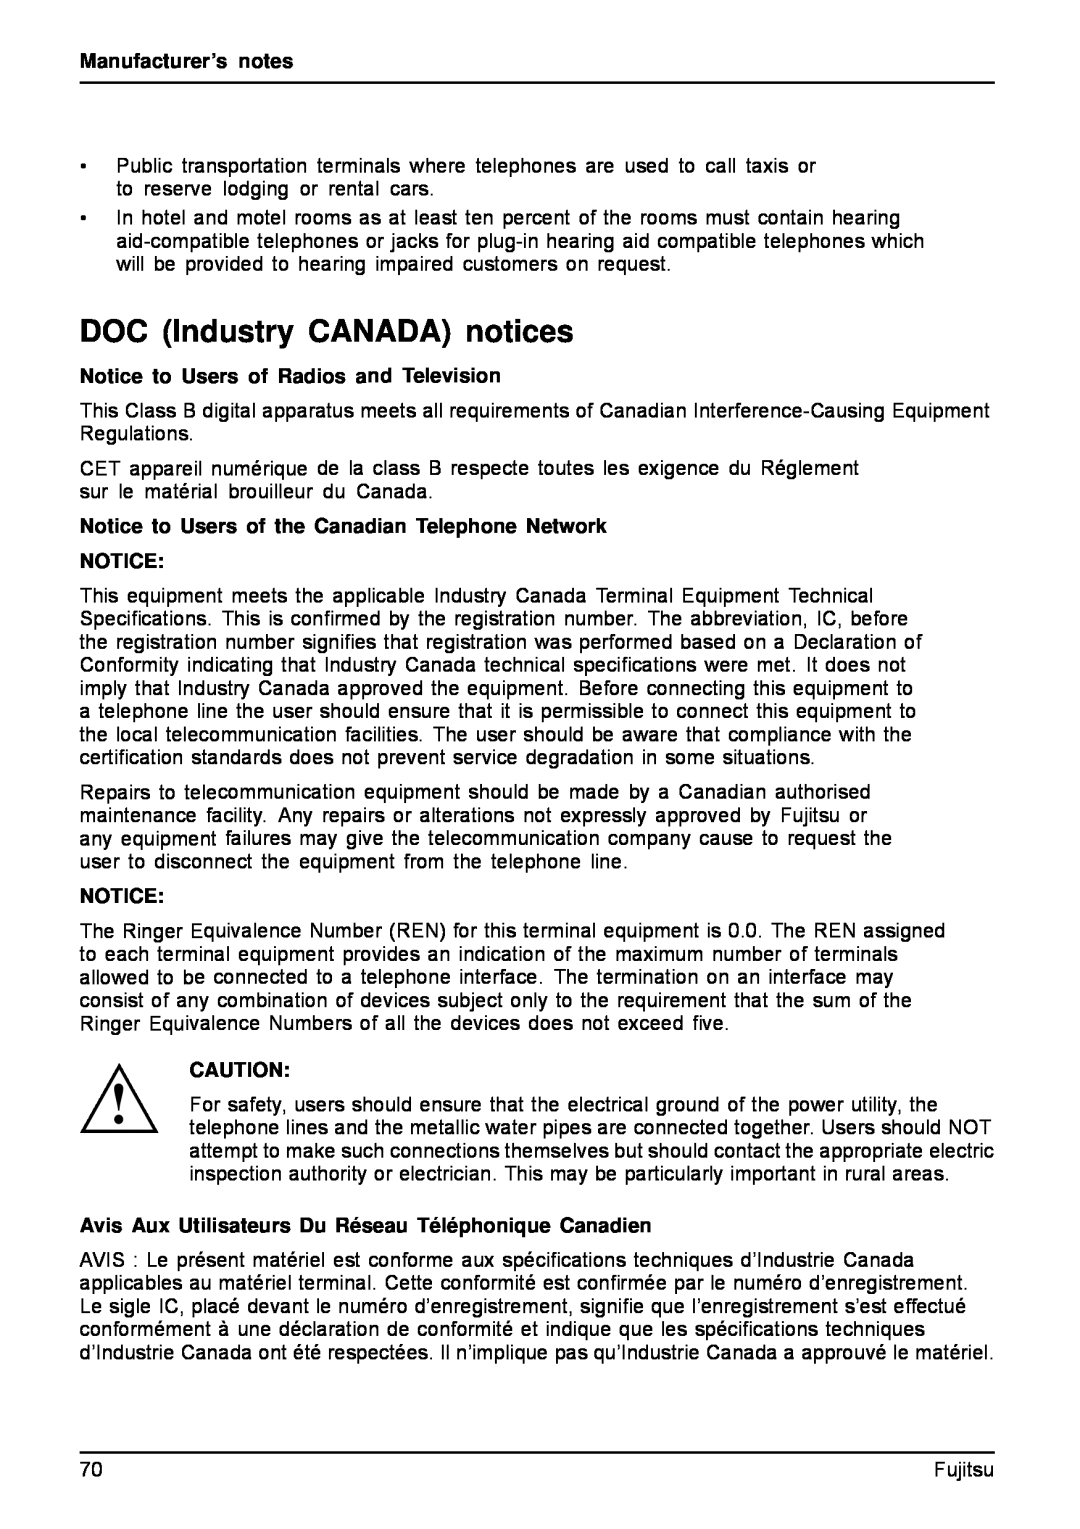 Fujitsu AH512, A512 manual DOC Industry CANADA notices, Manufacturer’s notes, Notice to Users of Radios and Television 